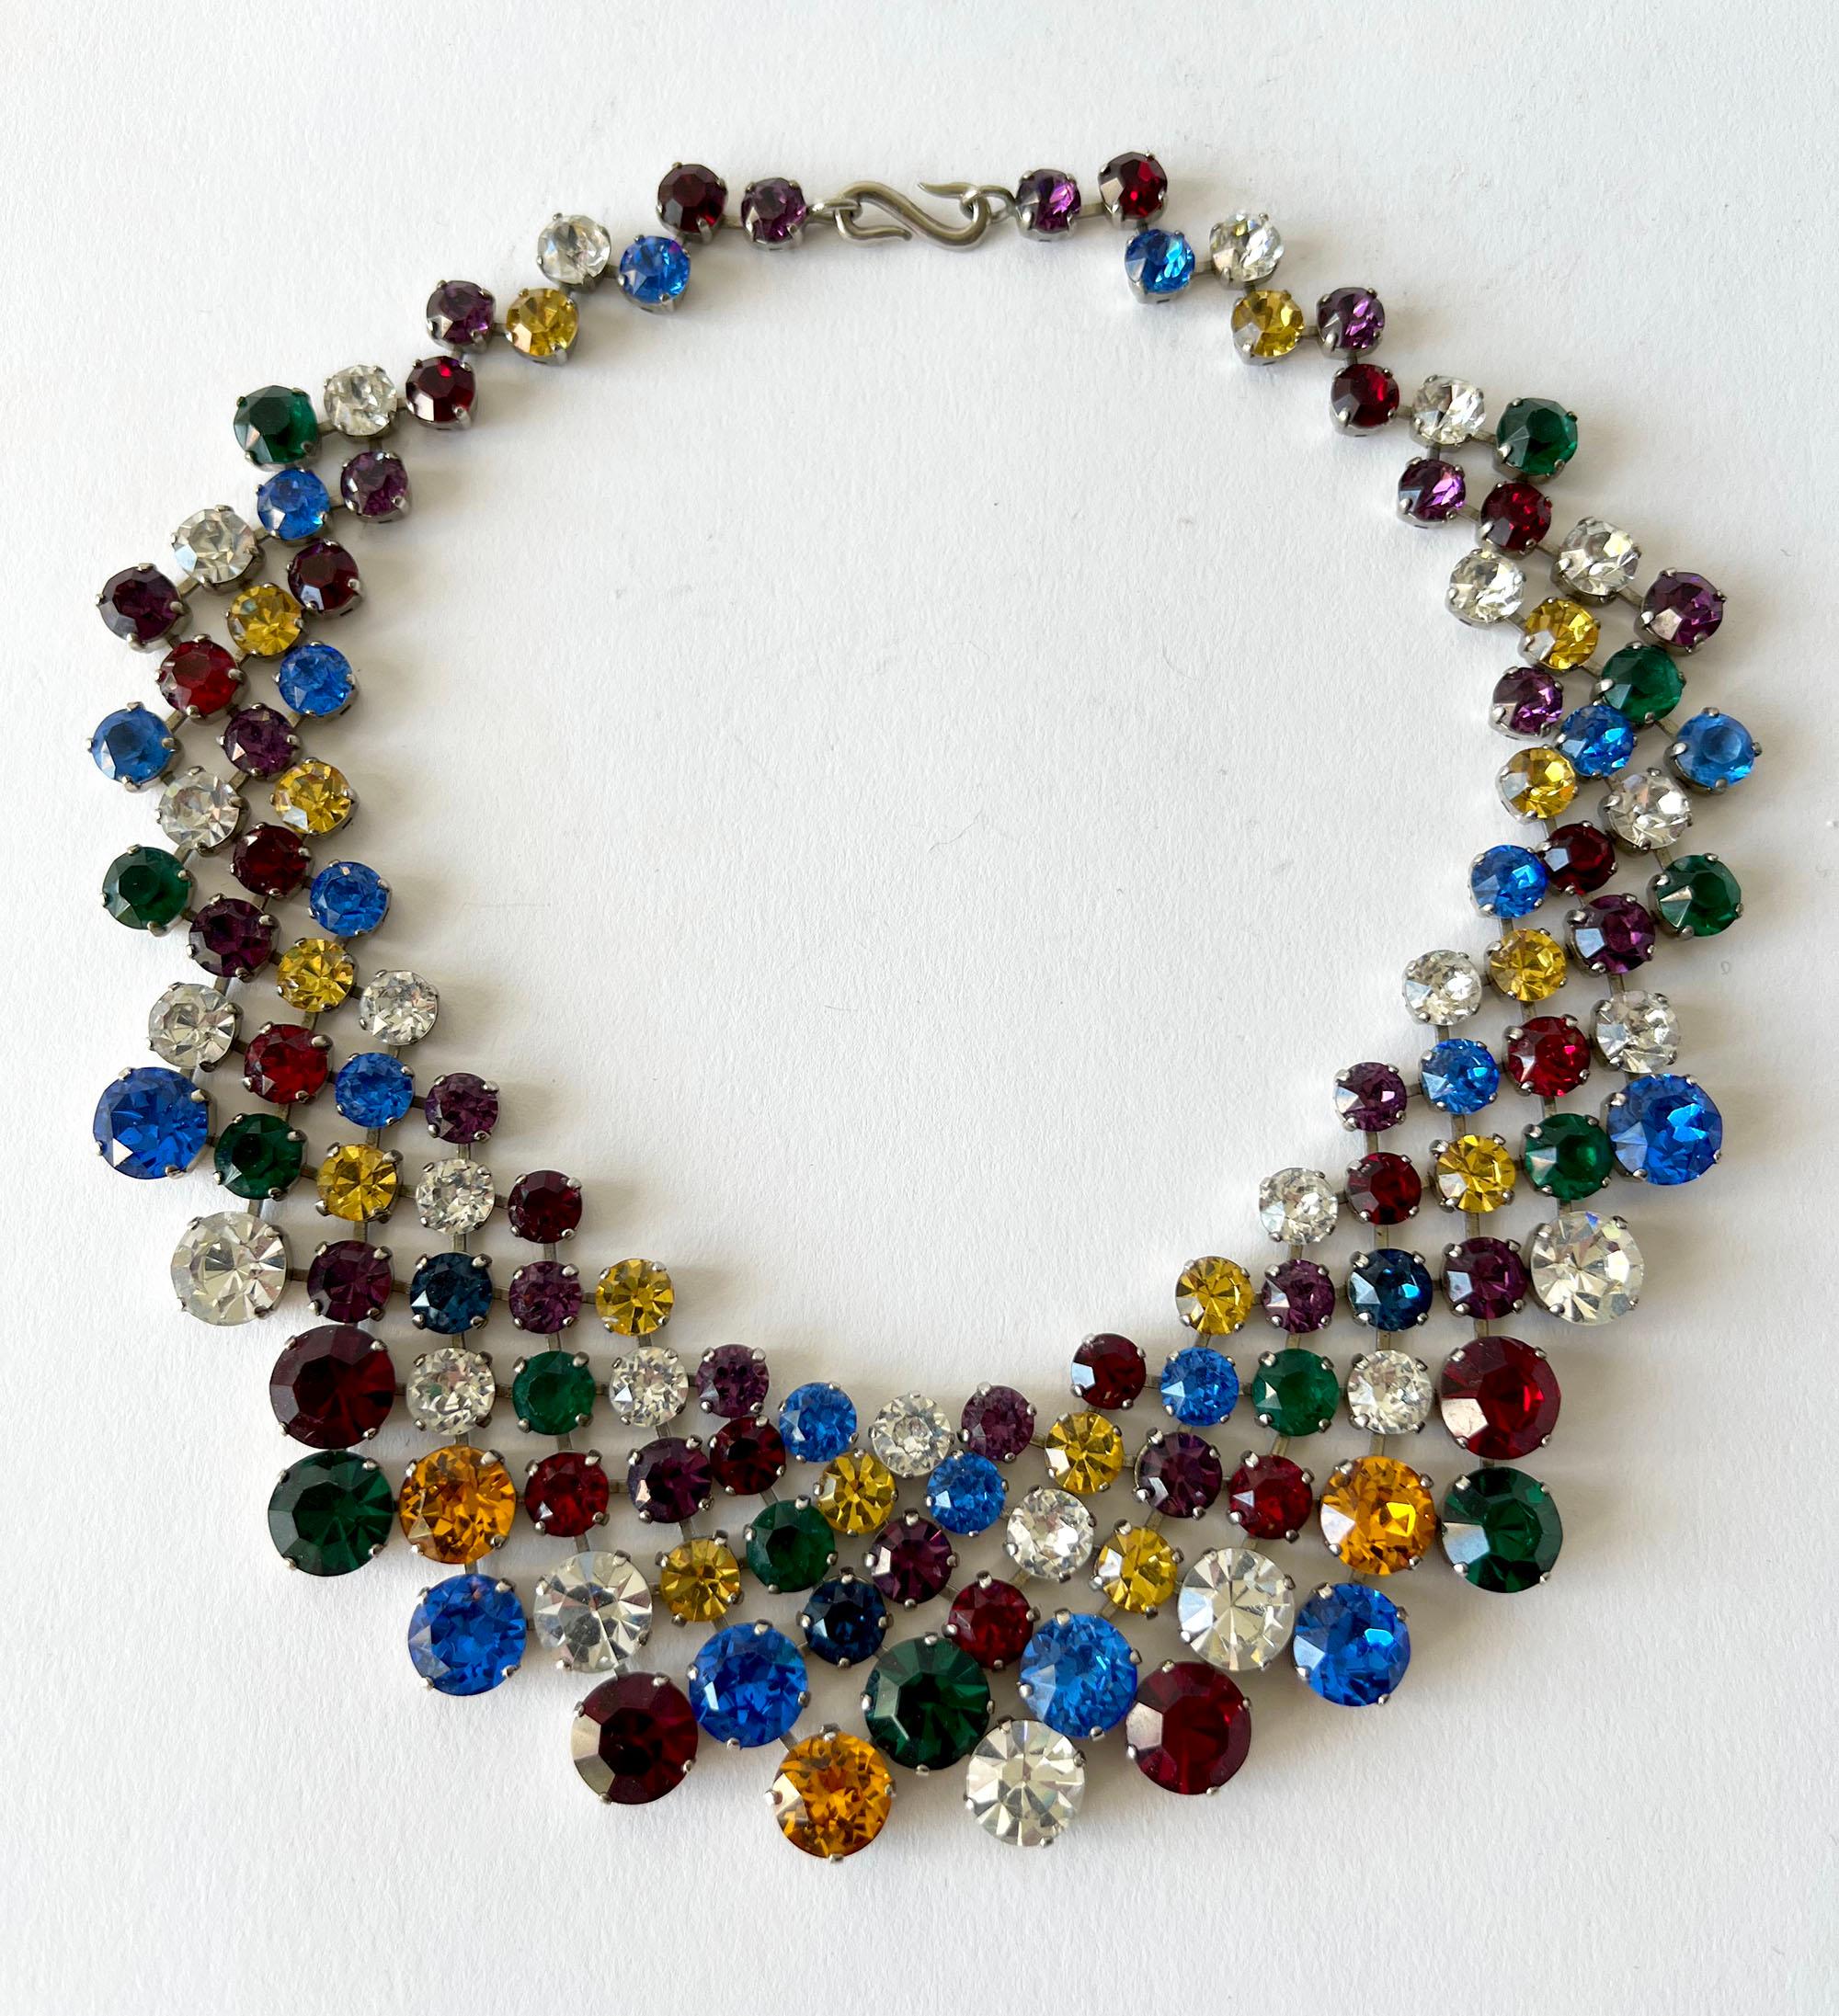 Vintage 1960s YSL bib necklace with multi colored crystal glass stones. Necklace measures 17